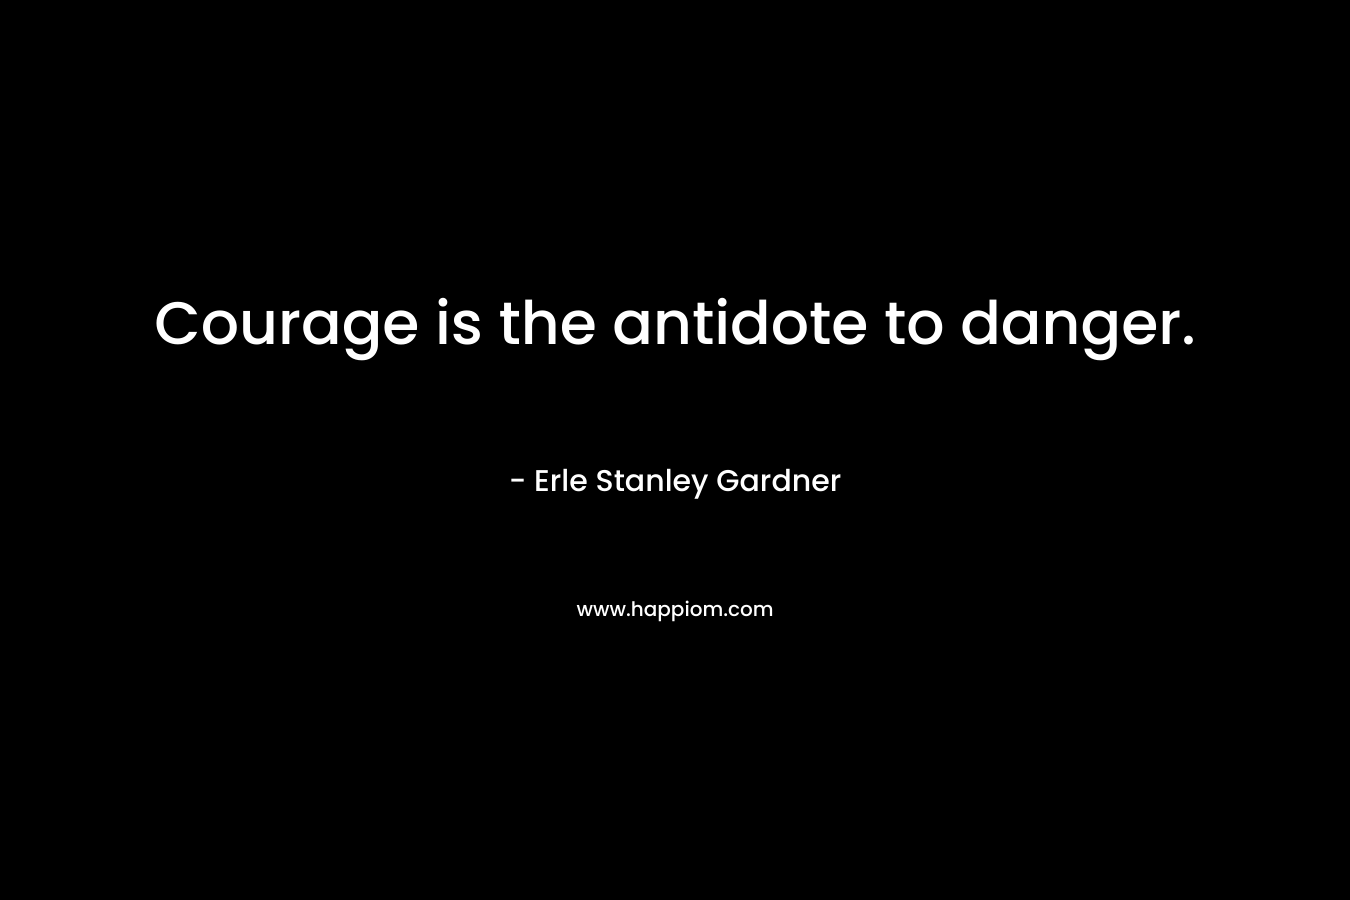 Courage is the antidote to danger.